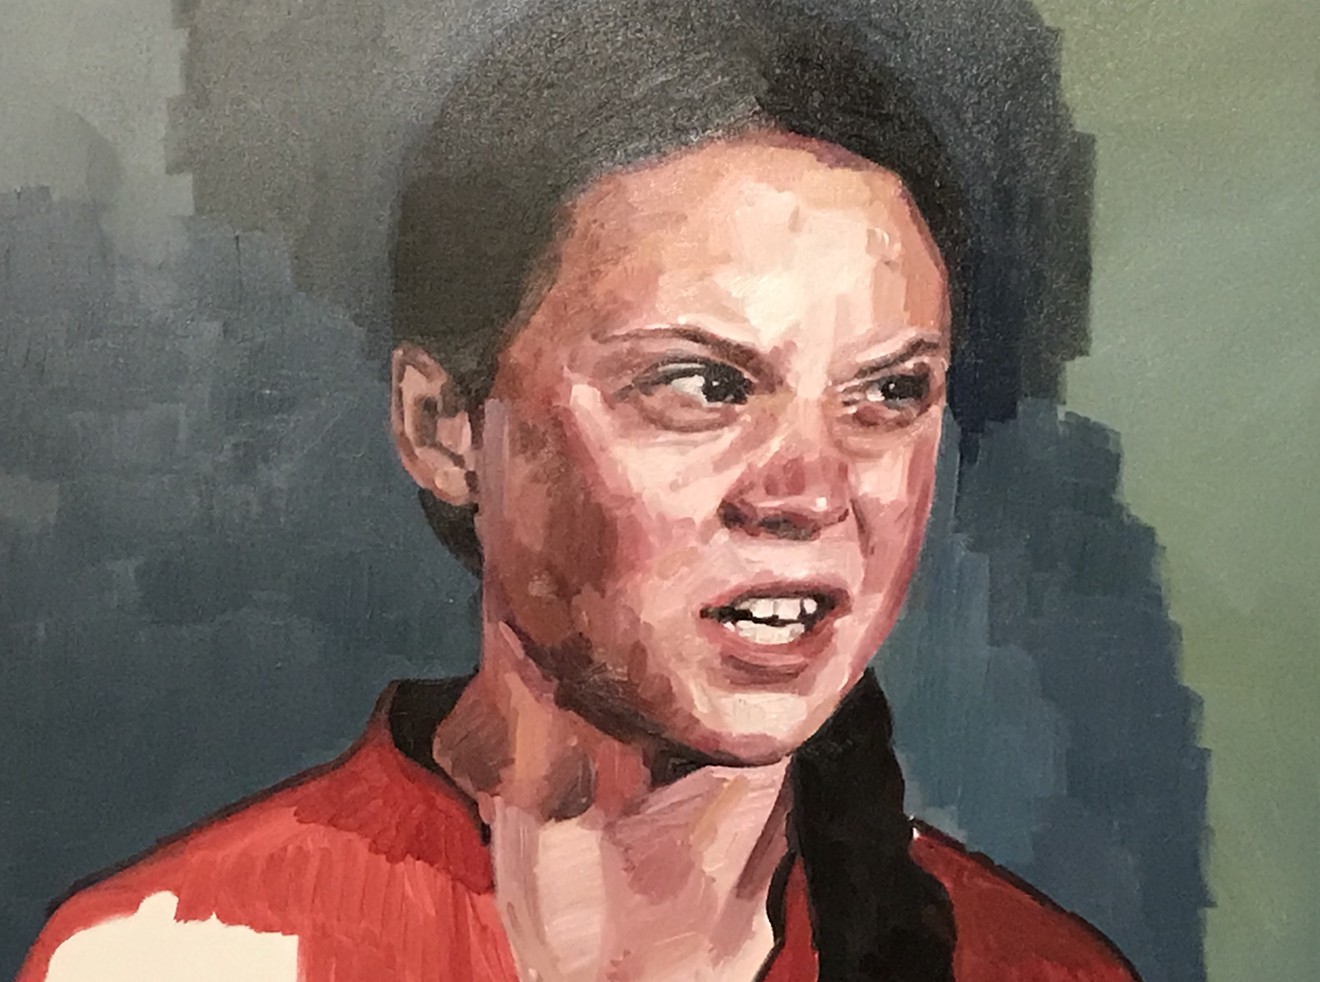 Detail of a Greta Thunberg portrait we spotted at Abe Zucca Gallery.